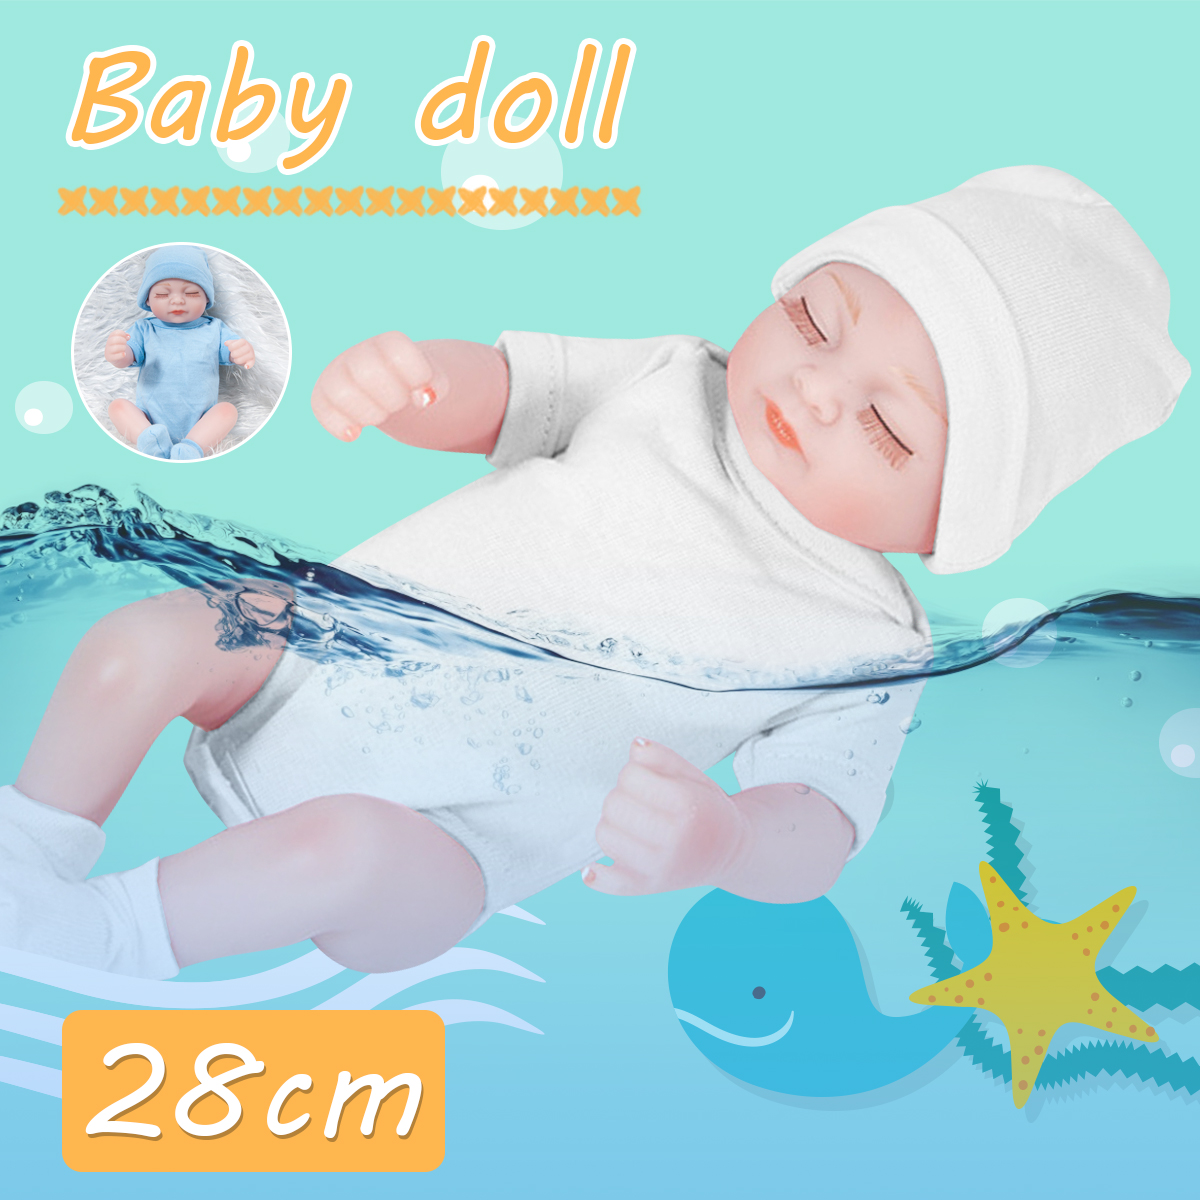 28CM-Soft-Silicone-Realistic-Sleeping-Reborns-Lifelikes-Newborns-Baby-Doll-Toy-with-Moveable-Head-Ar-1891375-1